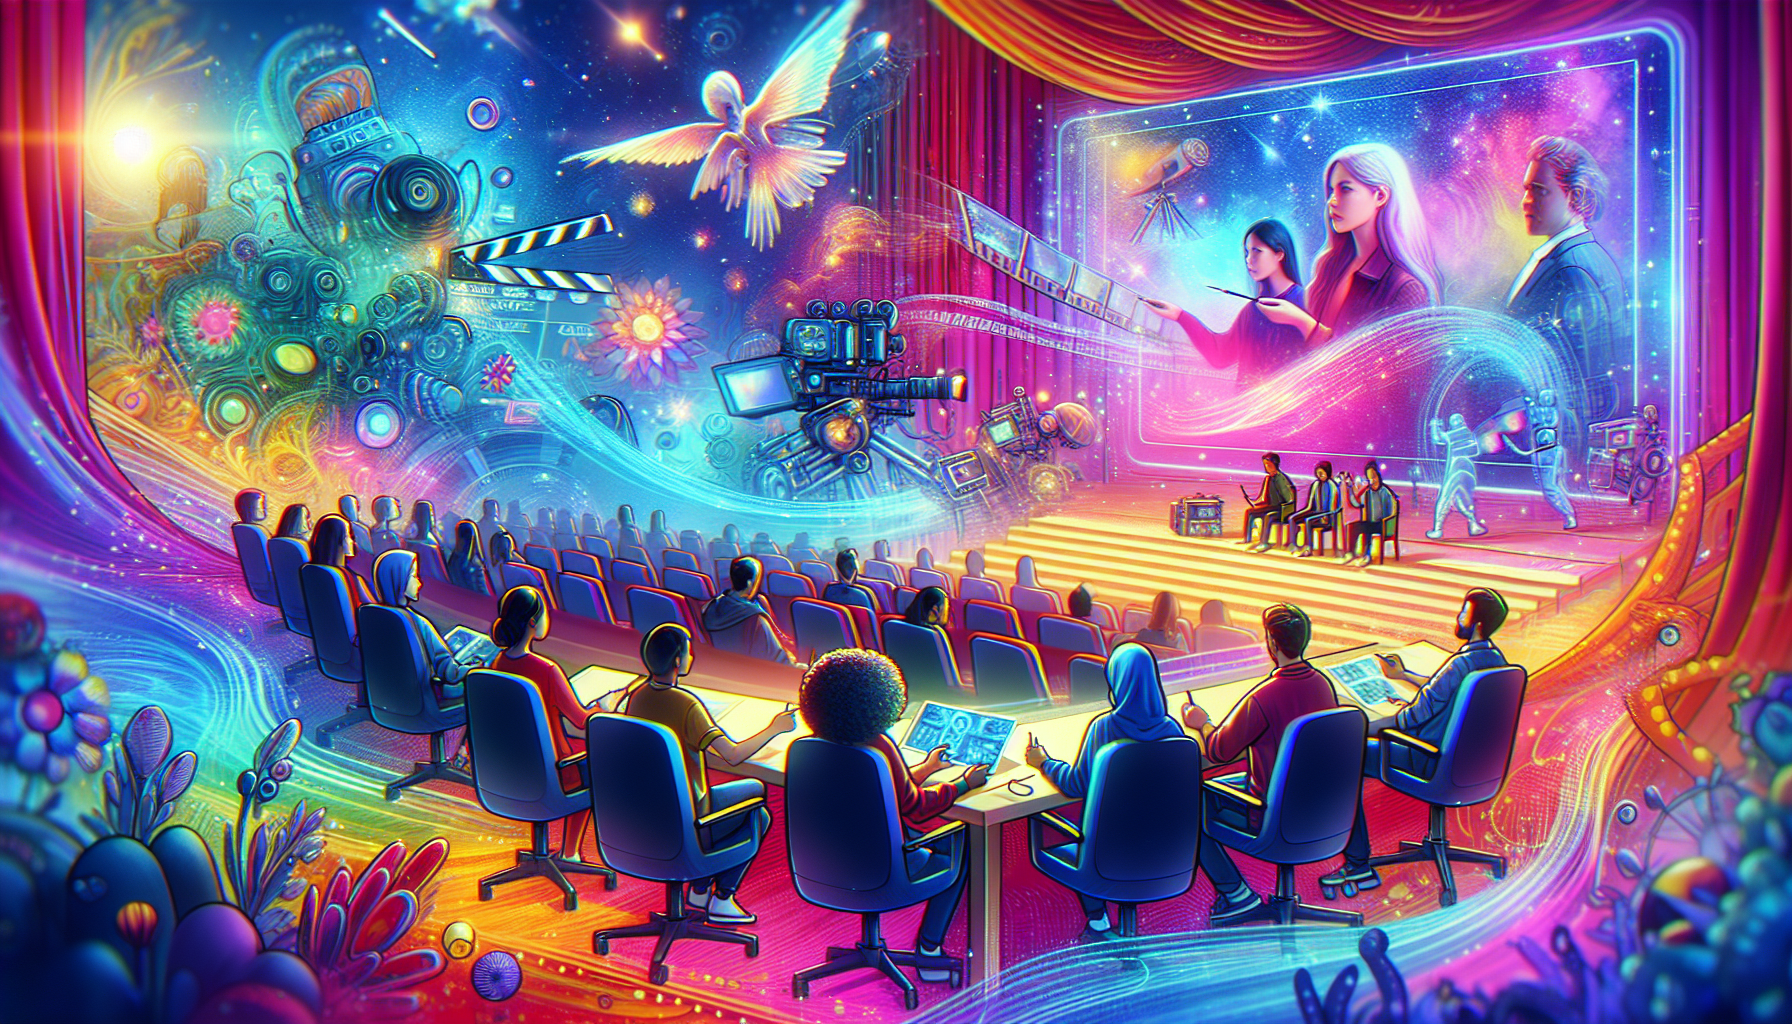 An artist's vibrant and imaginative interpretation of a future cinema set, depicting screenwriters discussing a holographic storyboard of a romantic film, with diverse futuristic technology and multi-